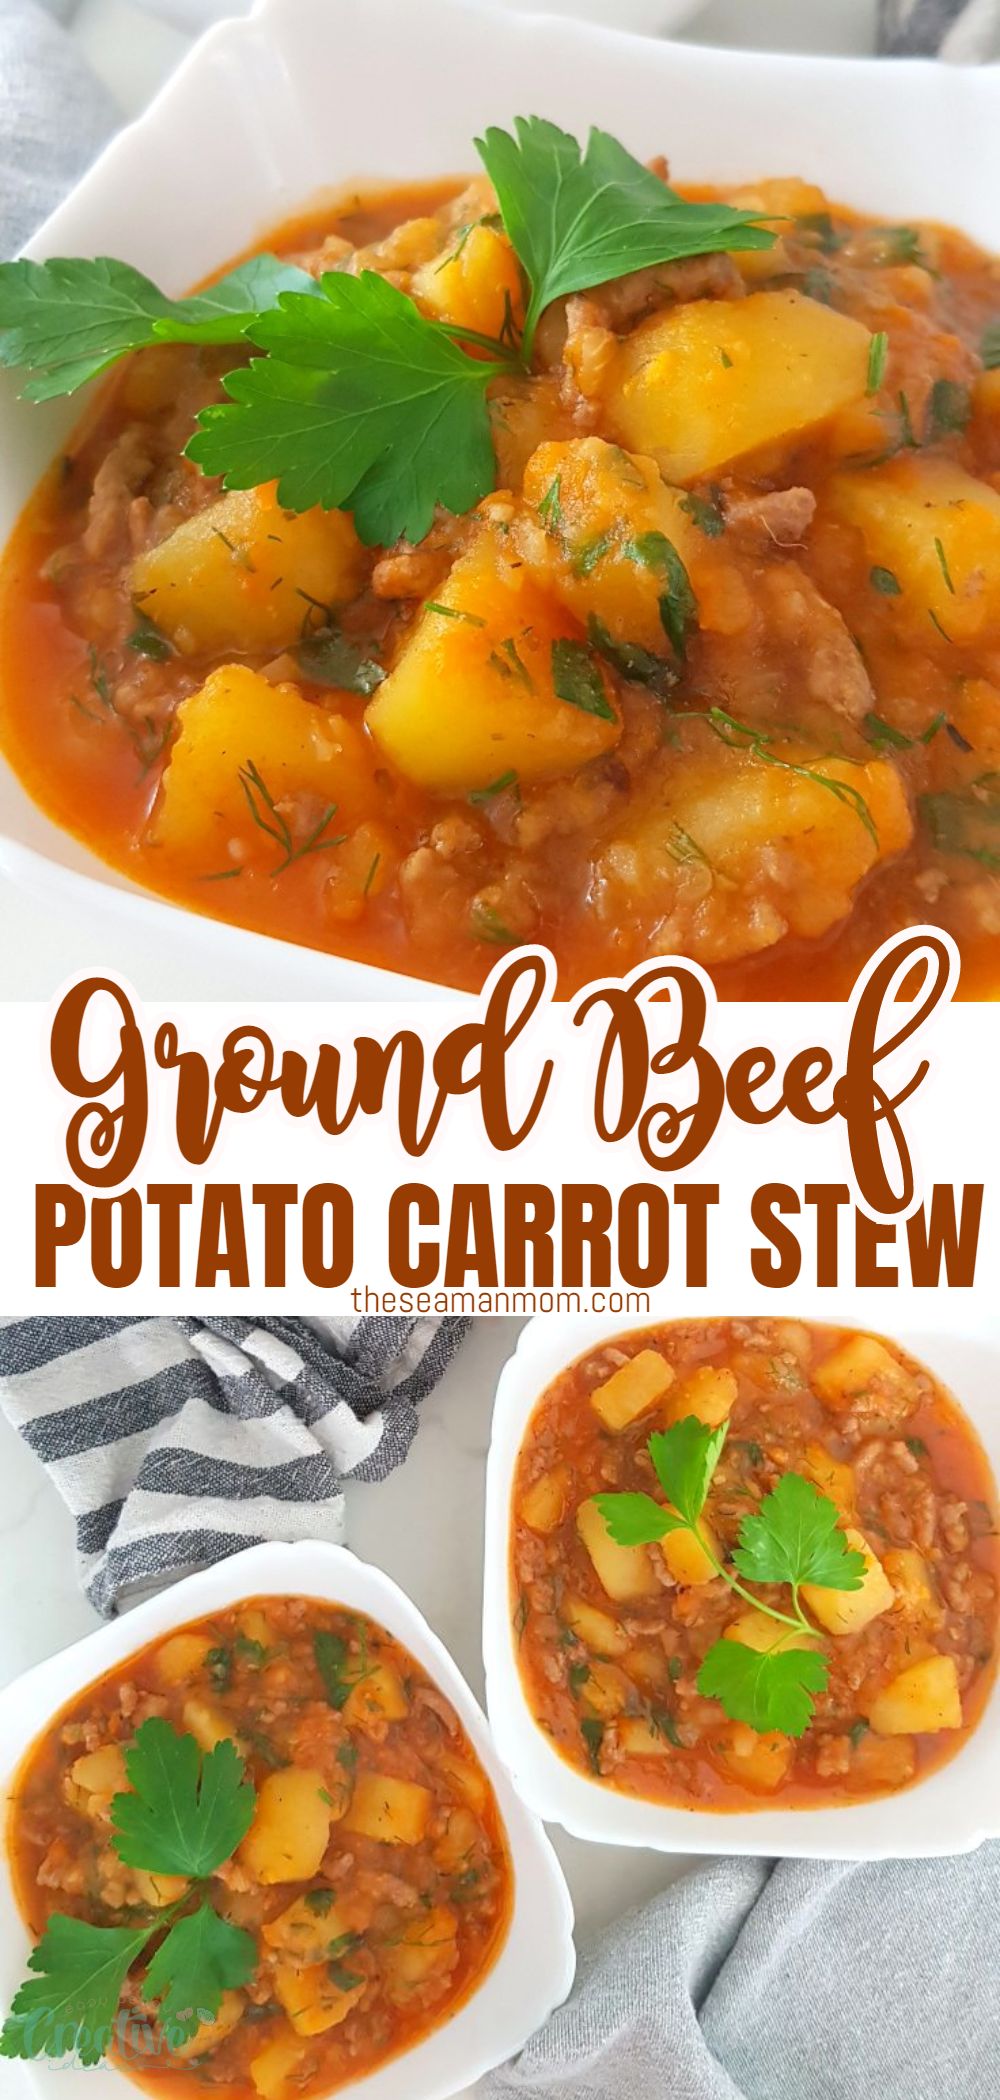 Need an amazing one-pot recipe to feed a crowd? This beef and potato stew is a delicious meal that is so easy to make! Everyone will love your beef stew with potatoes, carrots and onions and chances are, they'll be asking for seconds! via @petroneagu